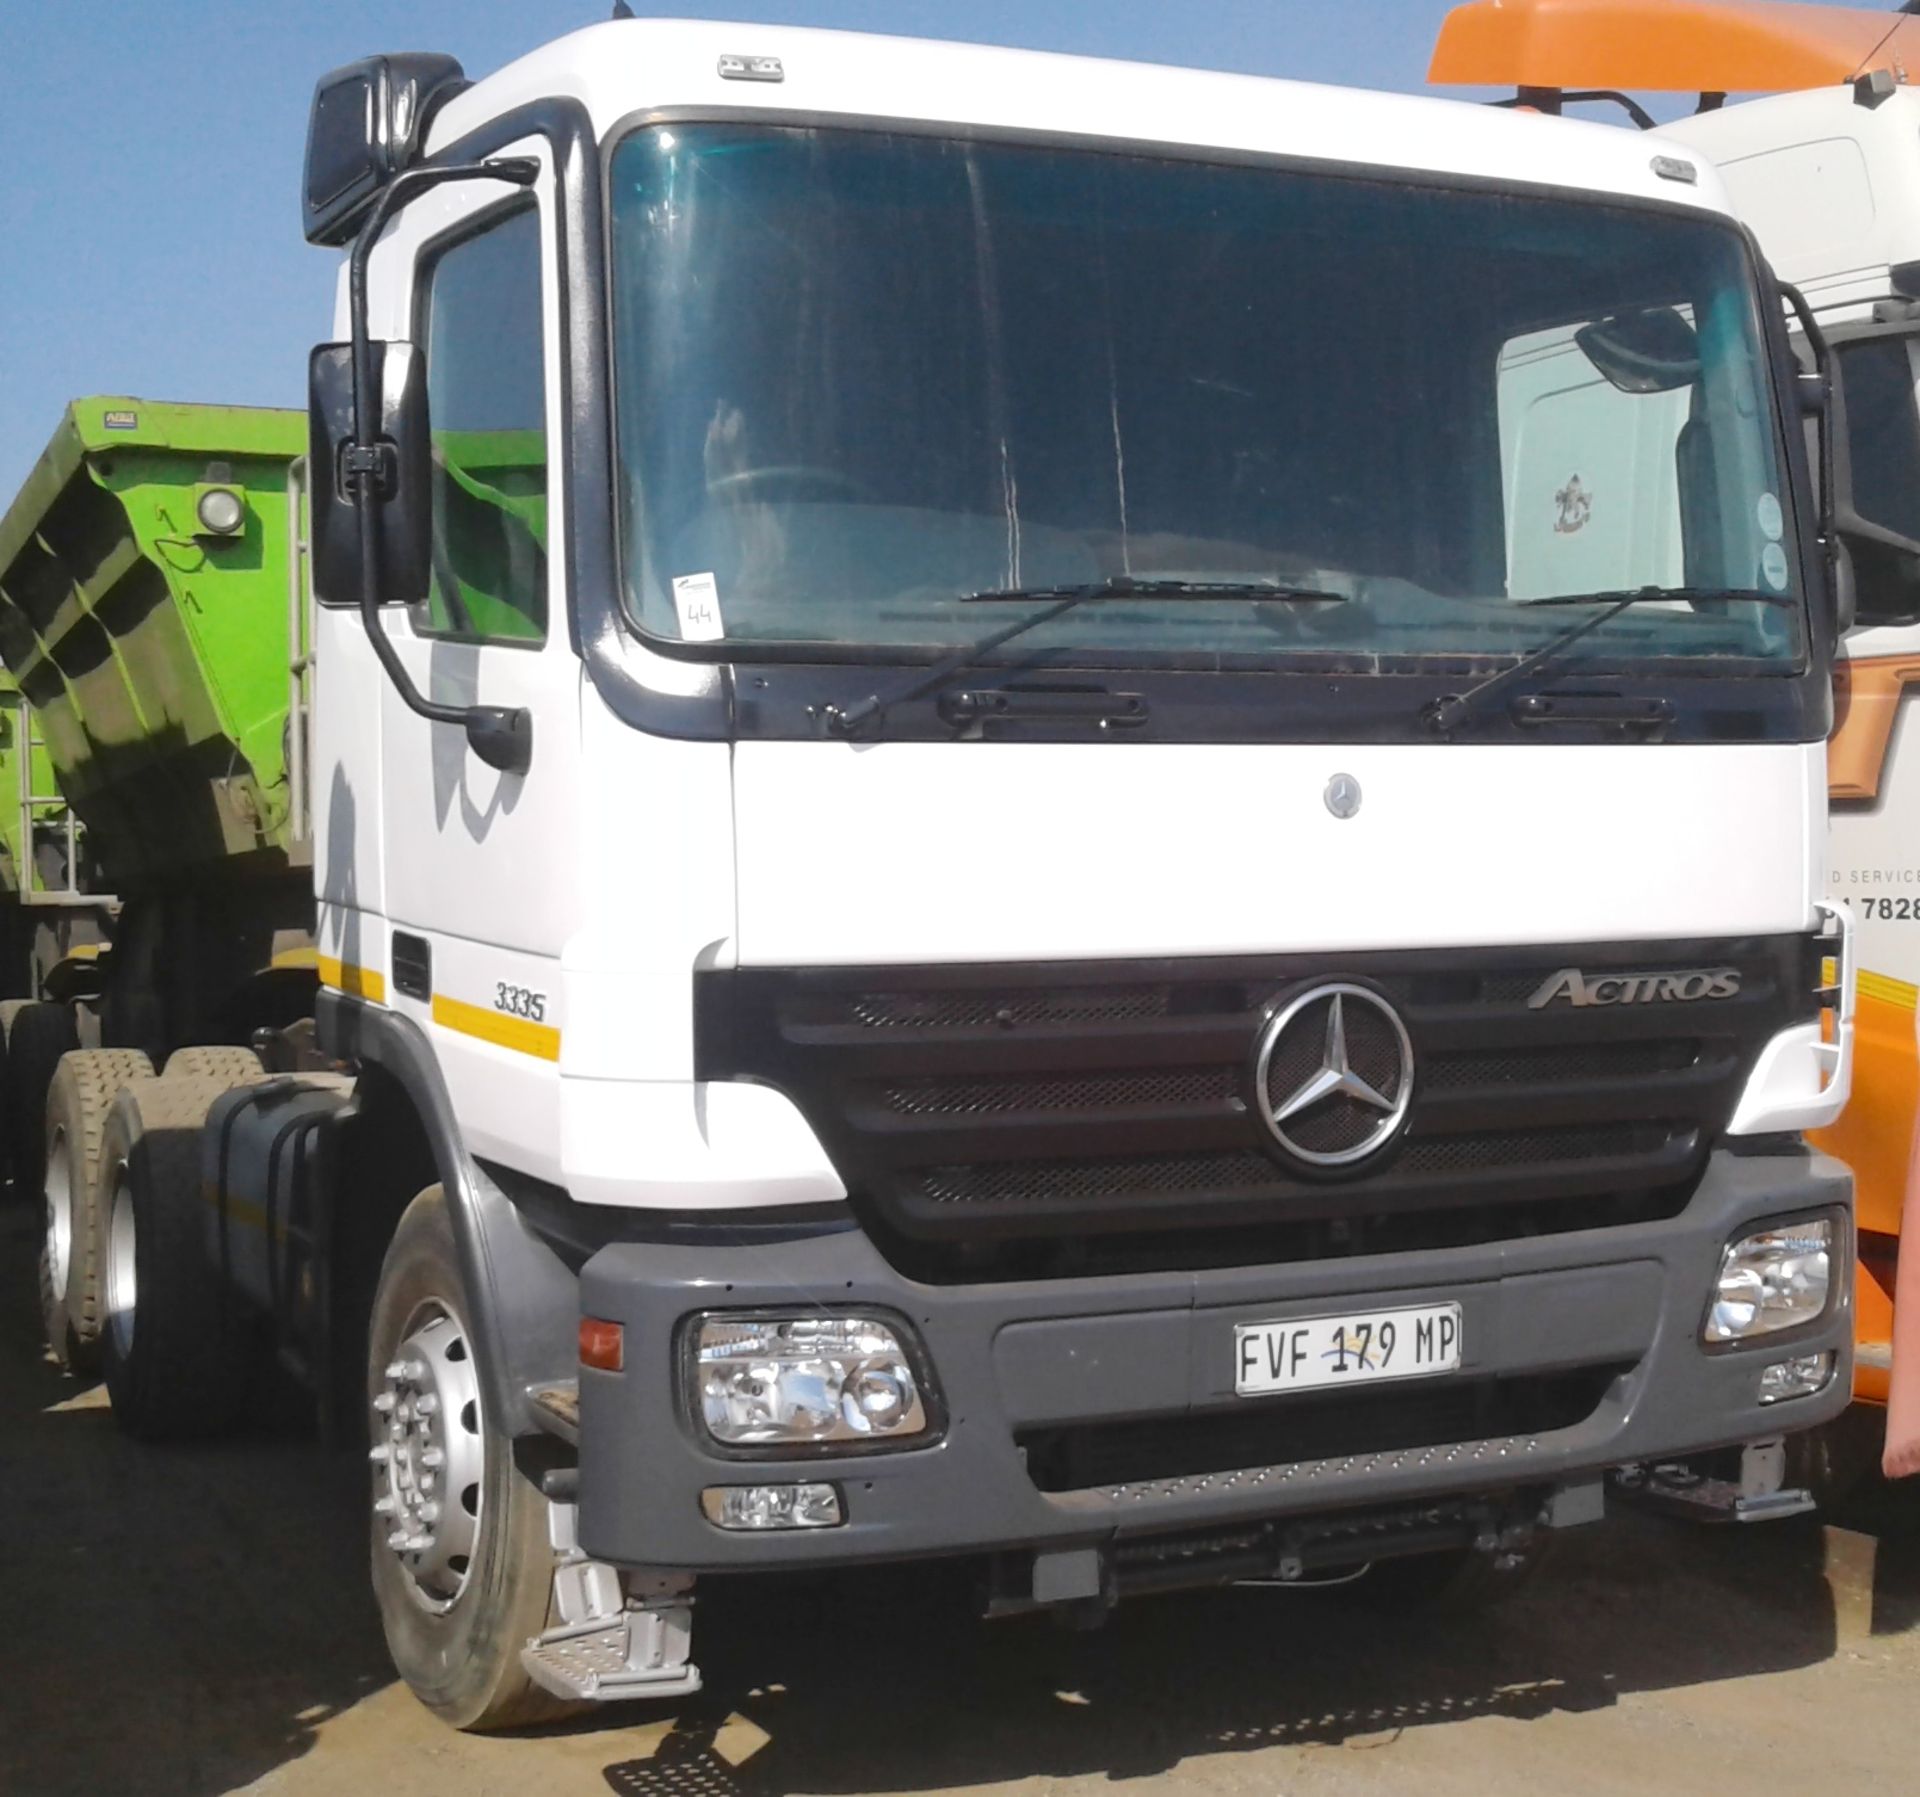 2007 M/BENZ ACTROS 3335 6X4 T/T - (FVF179MP)